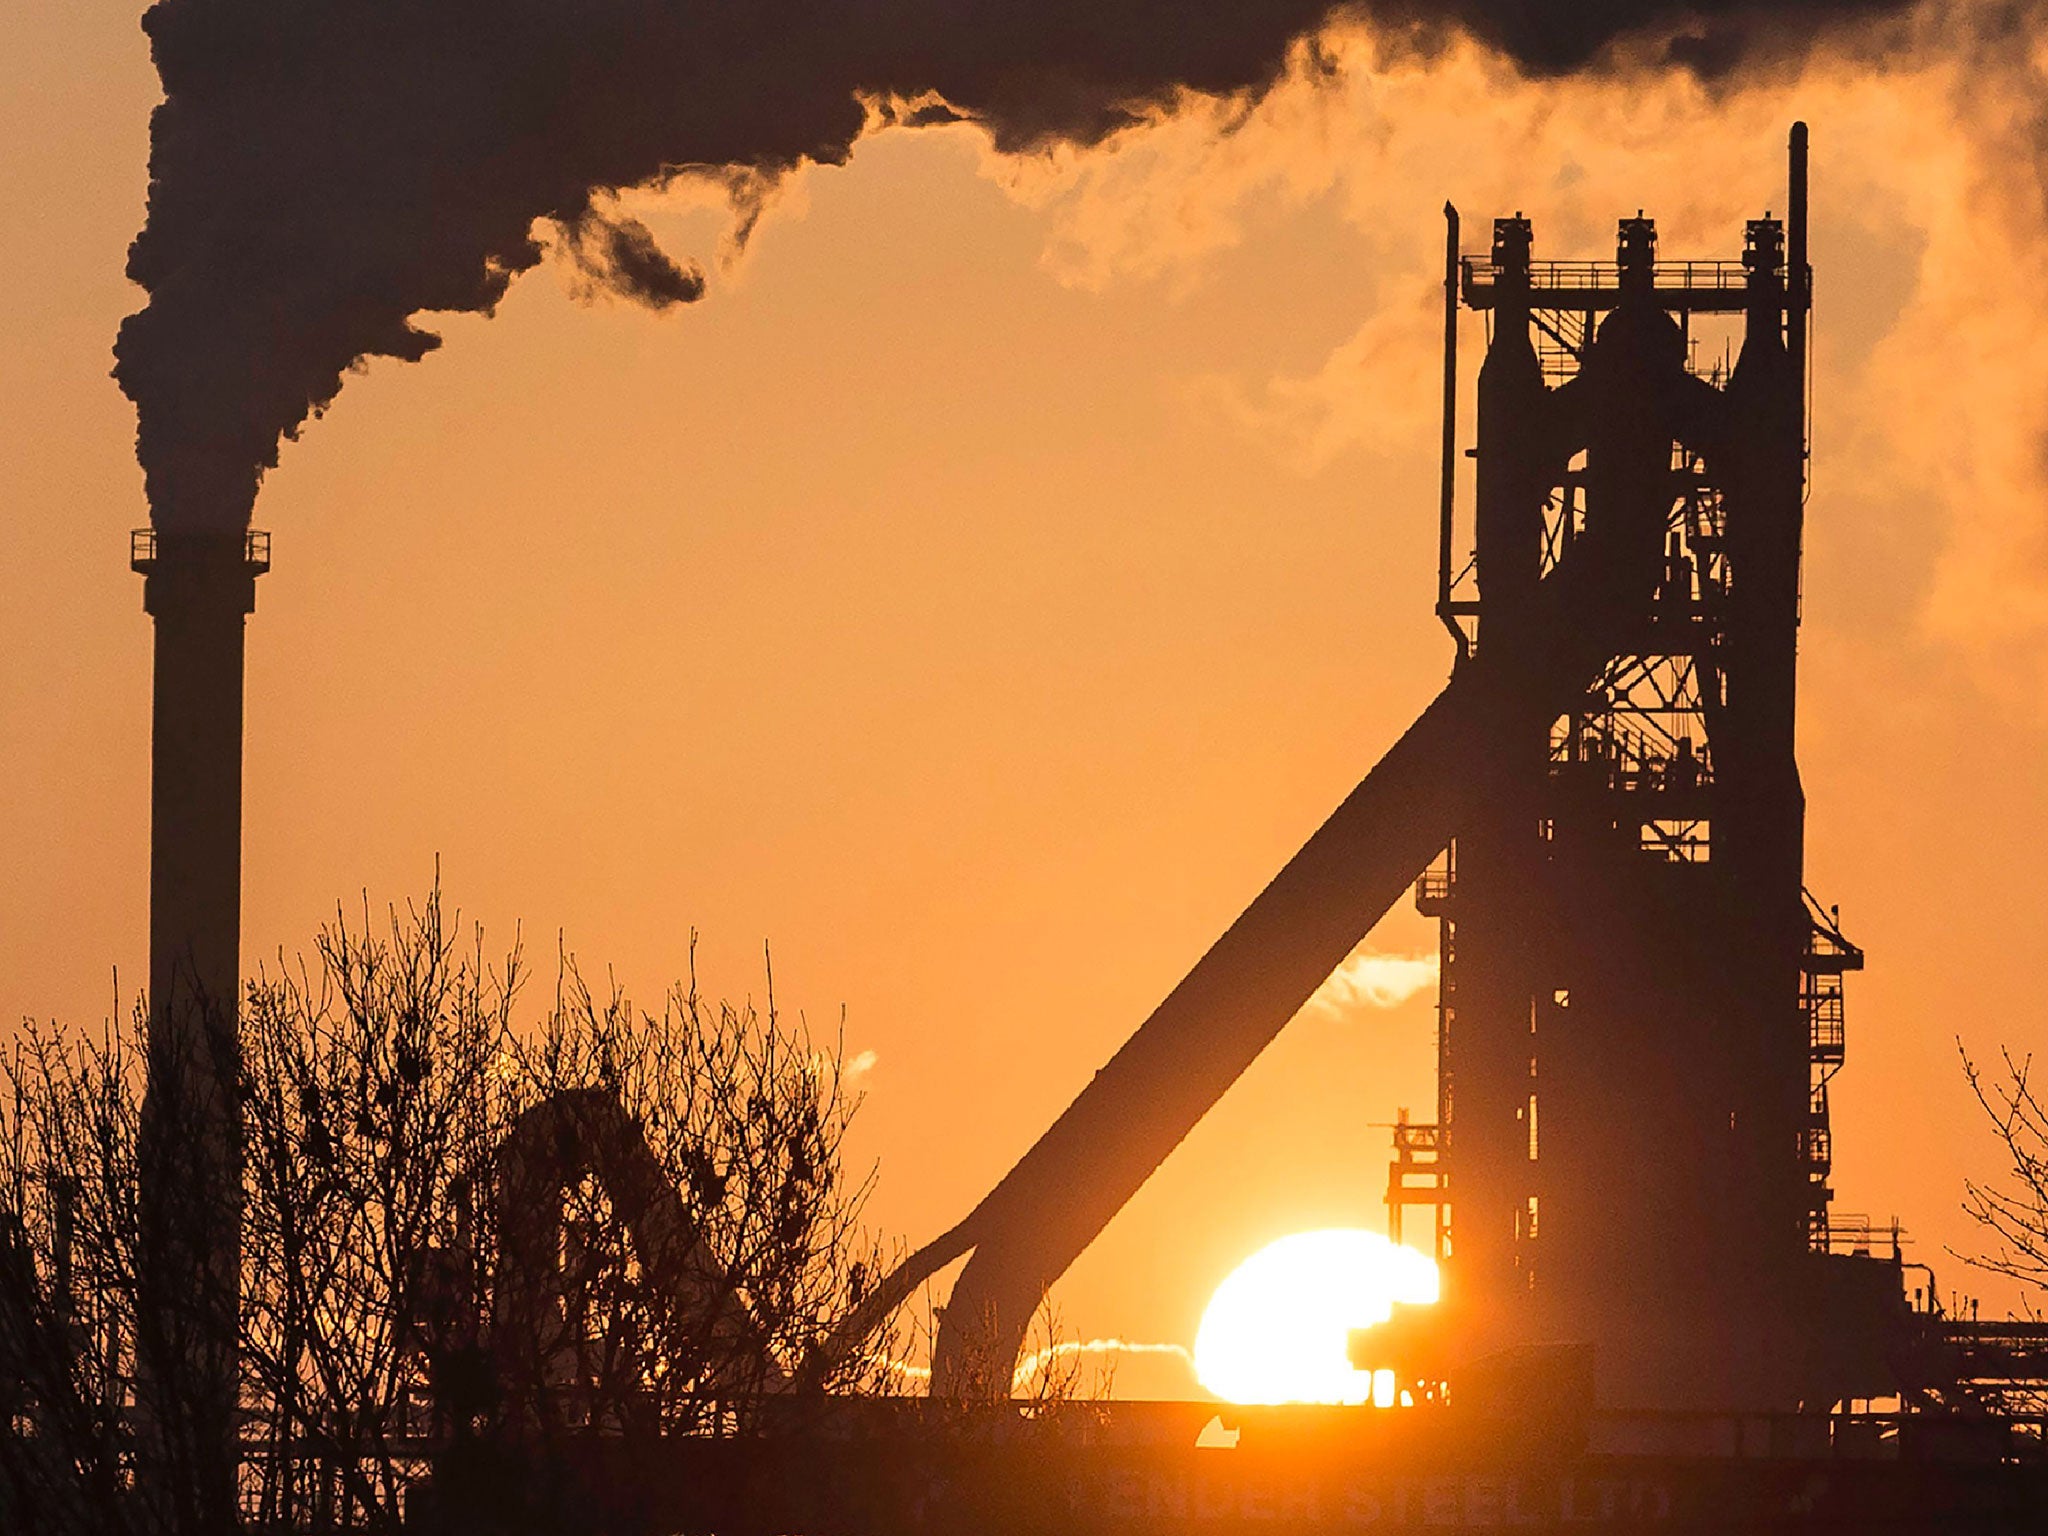 Tata Steel and Thyssenkrupp have reportedly been engaged in tie-up talks for over a year